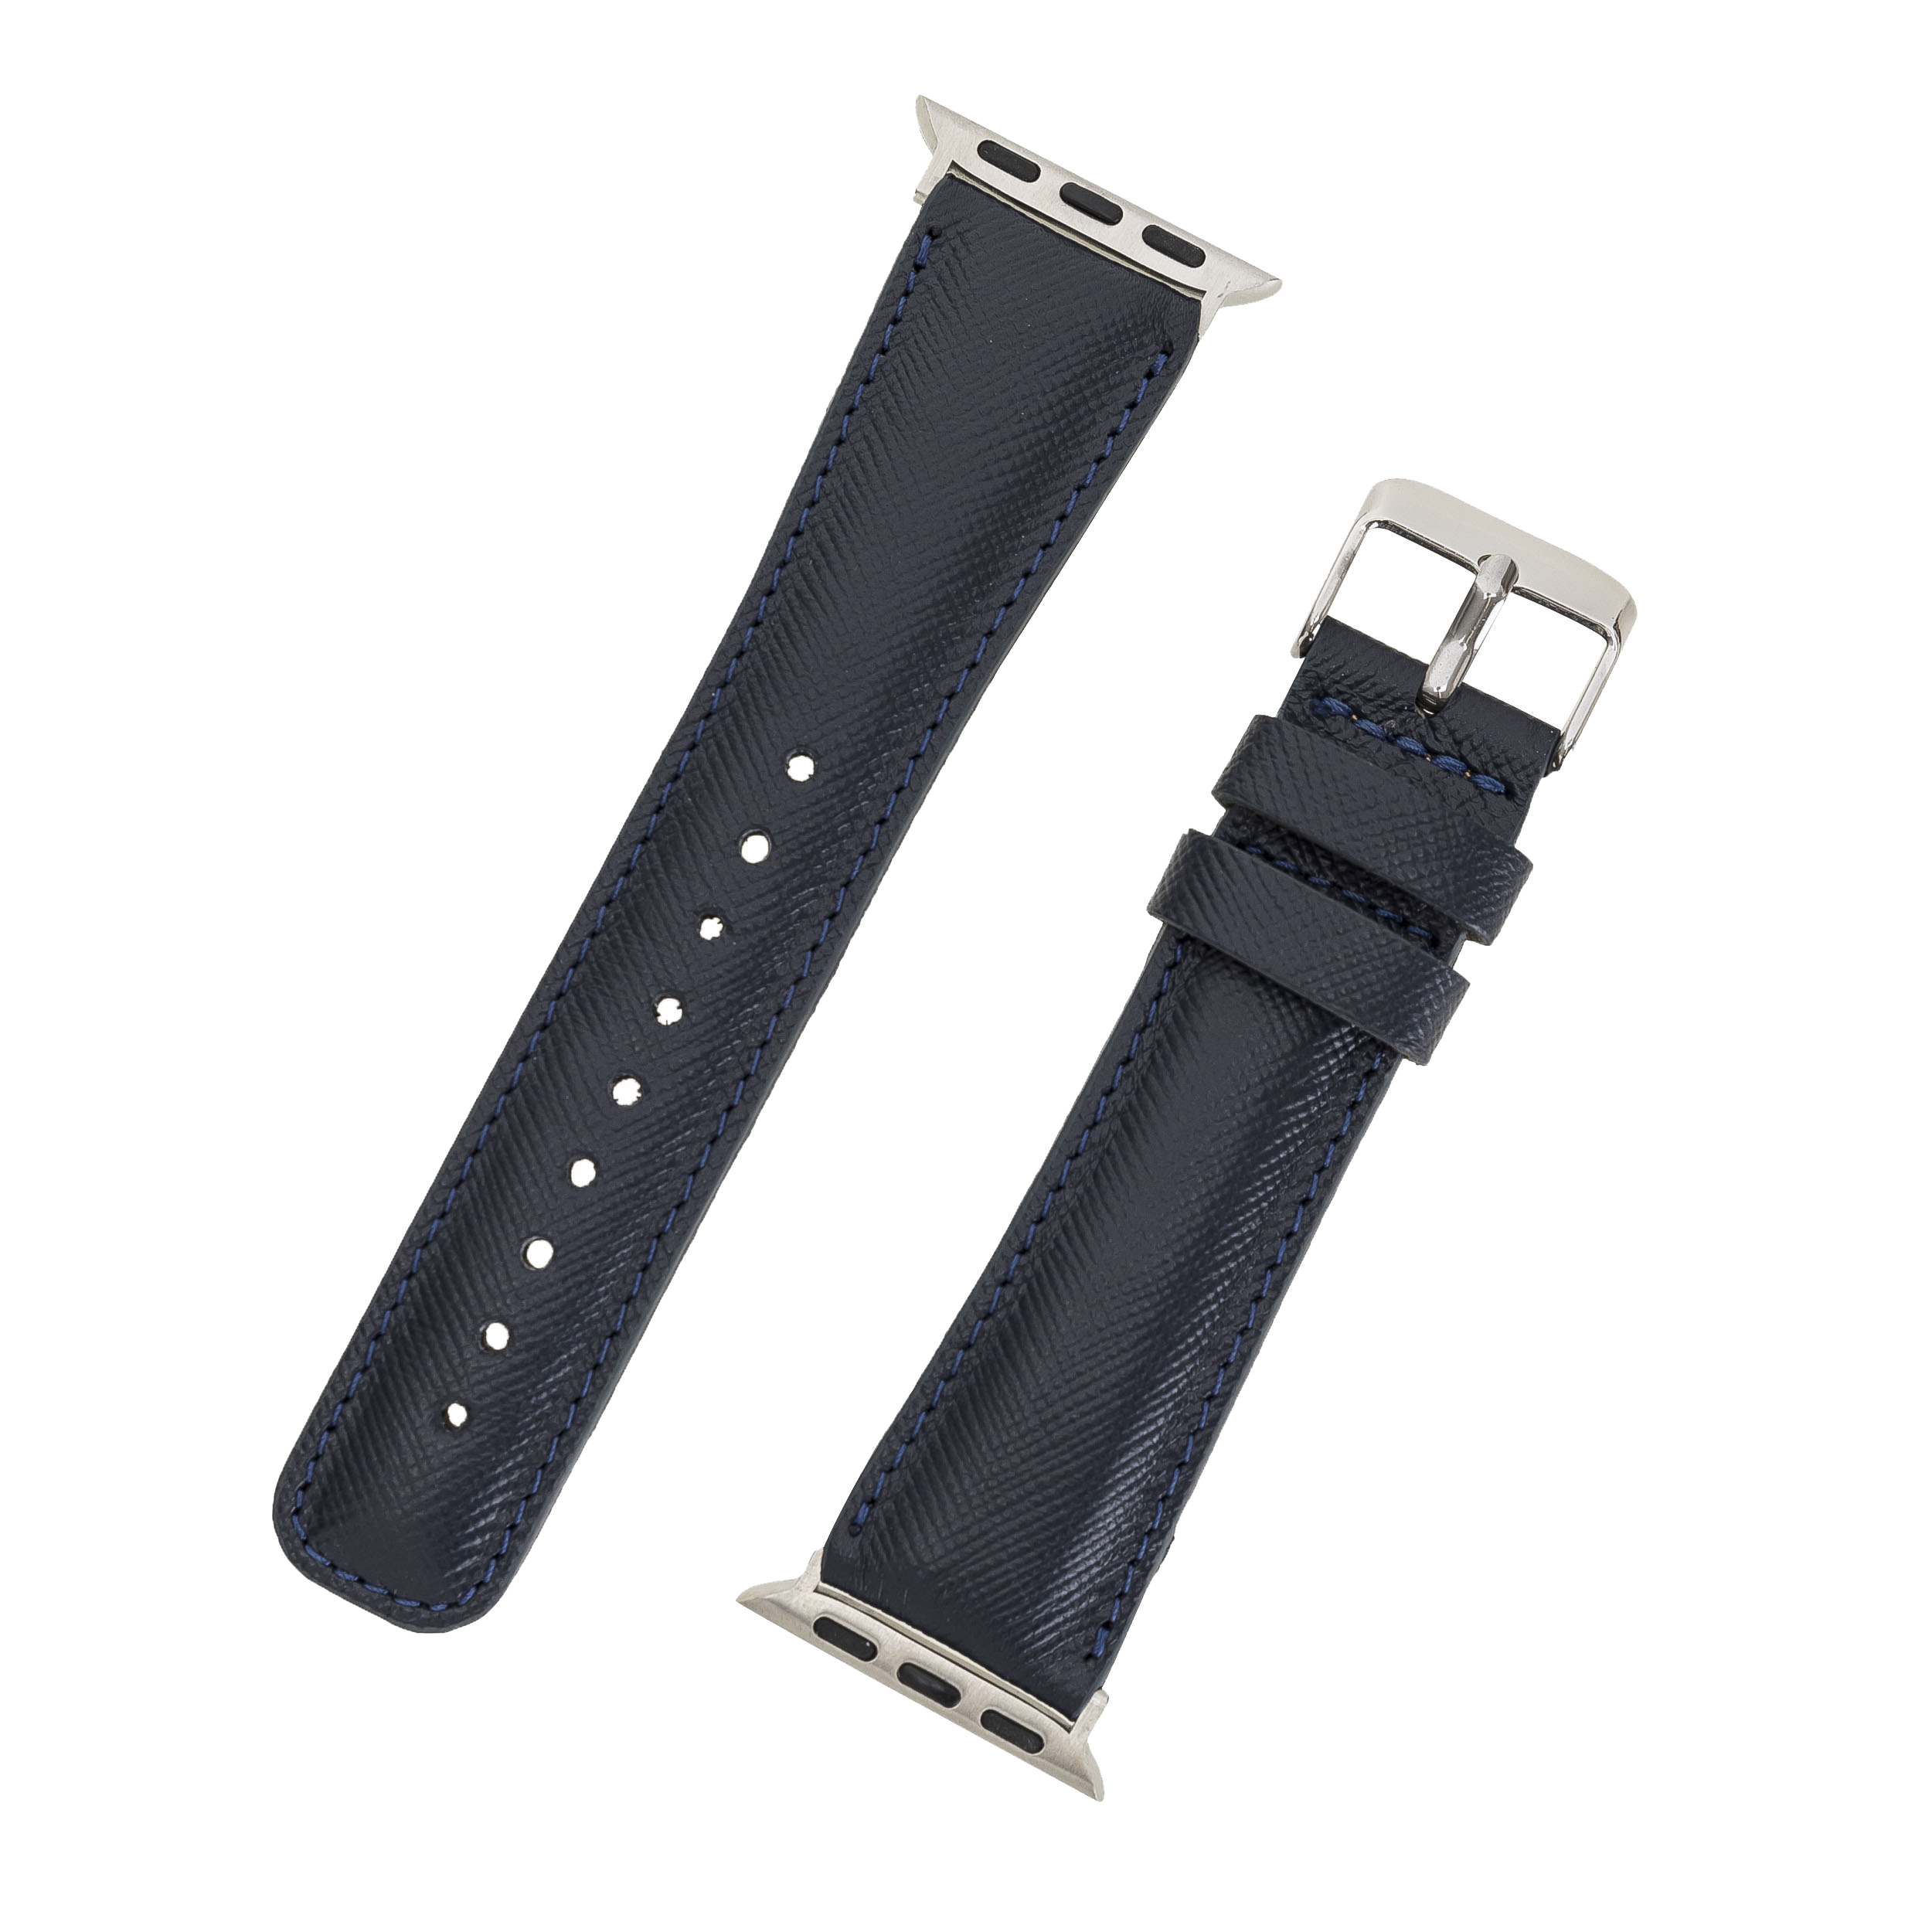 LupinnyLeather Liverpool Collection Leather Watch Band for Apple & Fitbit Versa Watch Band 74